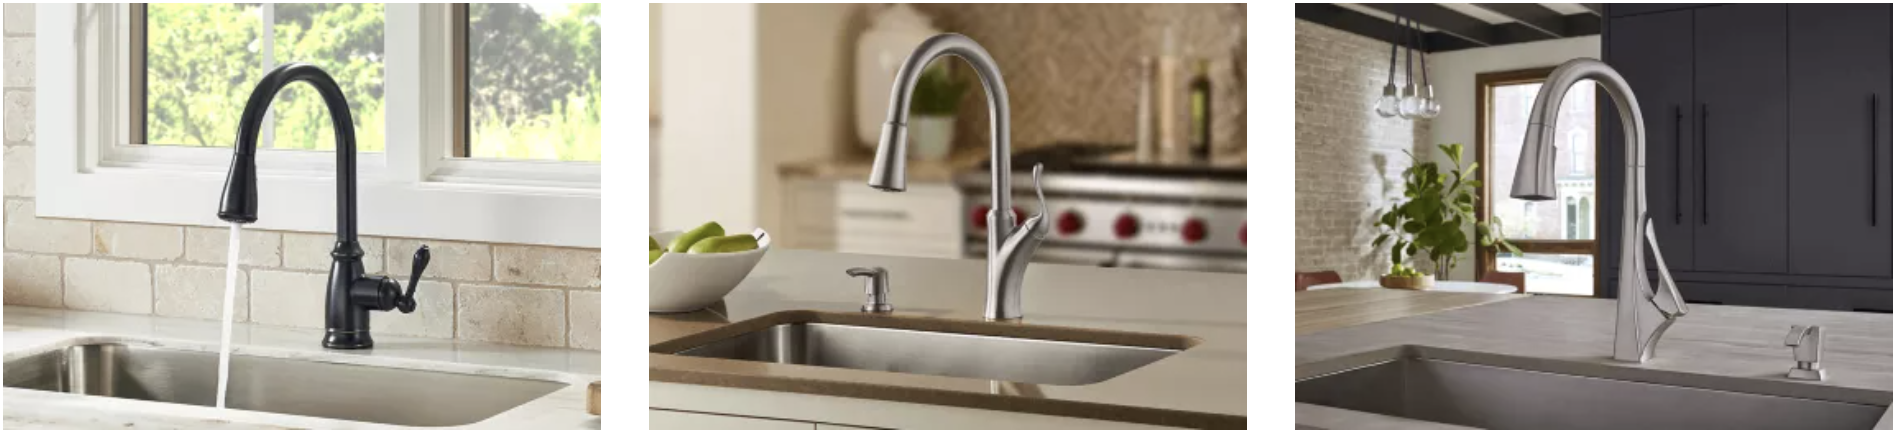 three pfister faucets showing traditional, transitional & contemporary styles.